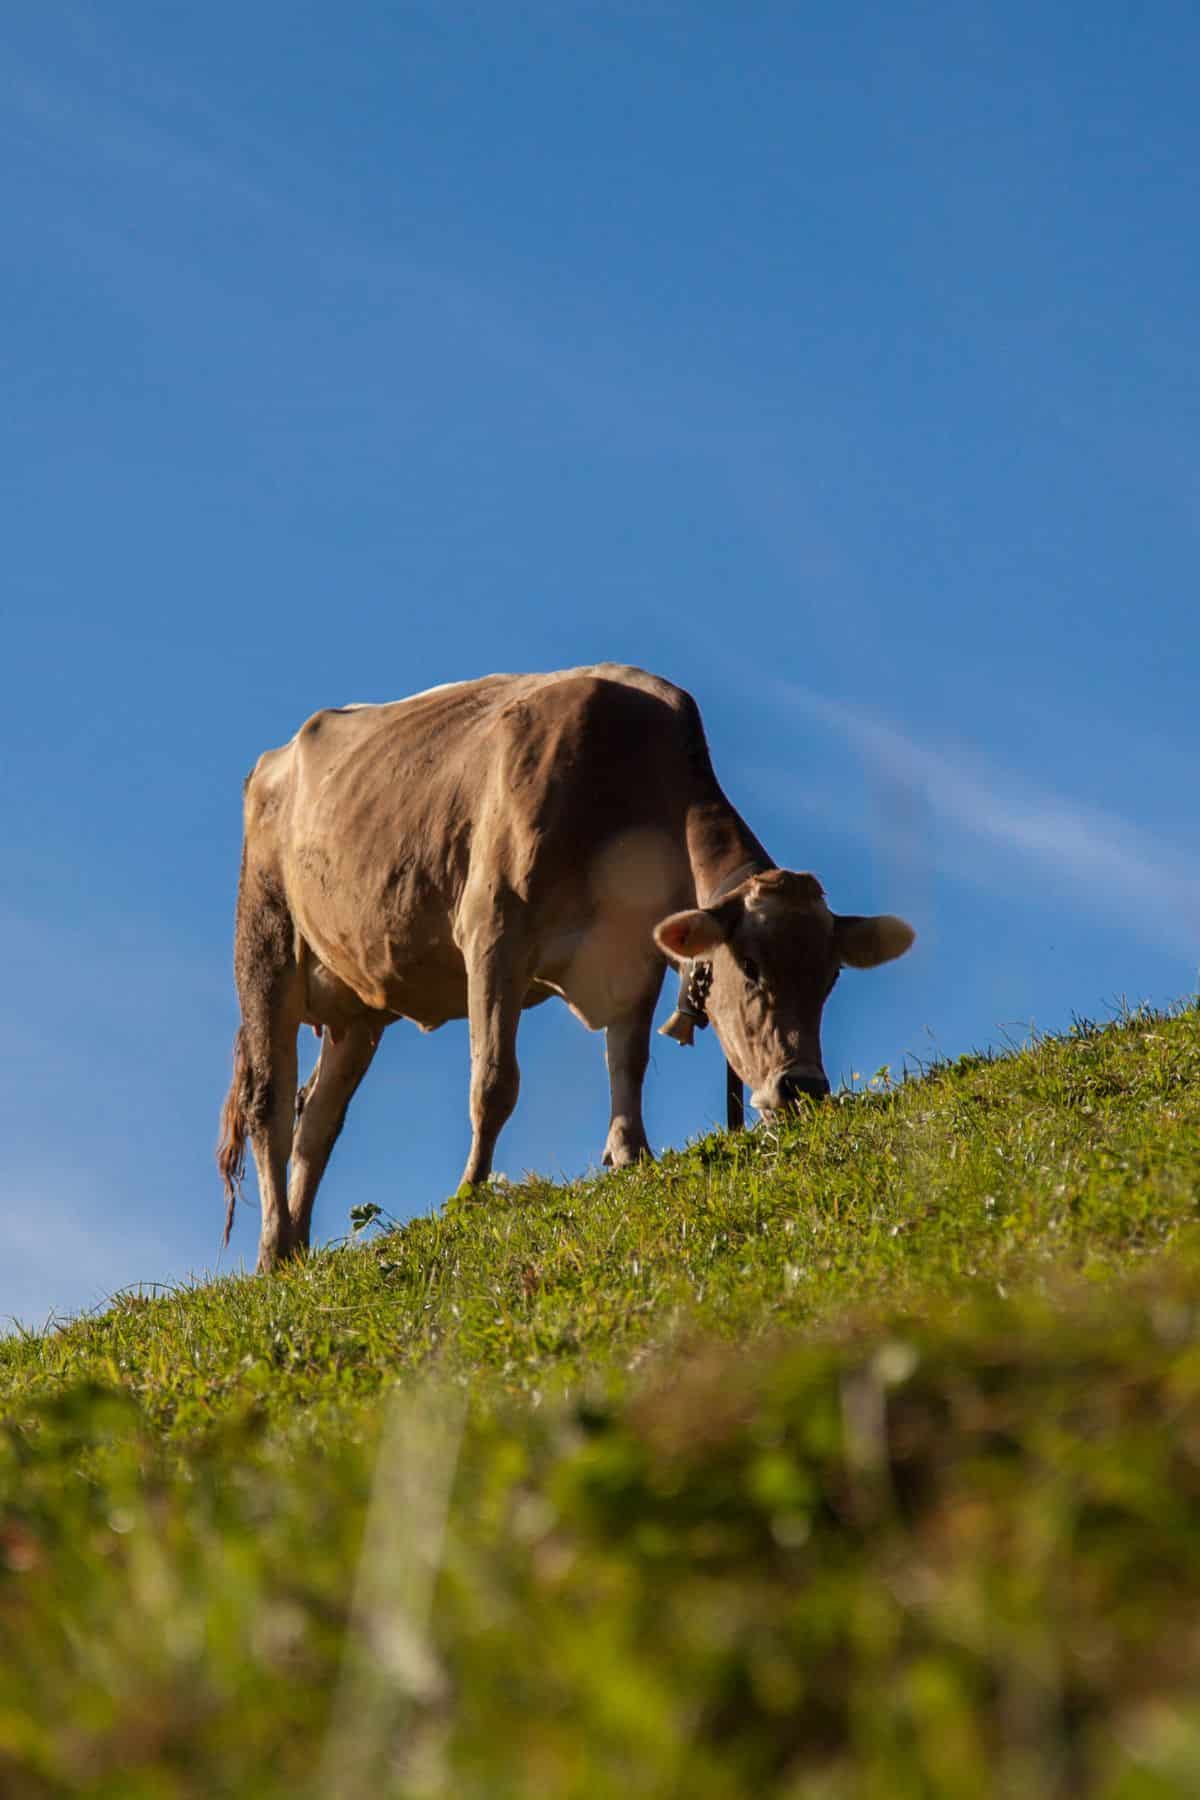 cow eating grass on a hill.